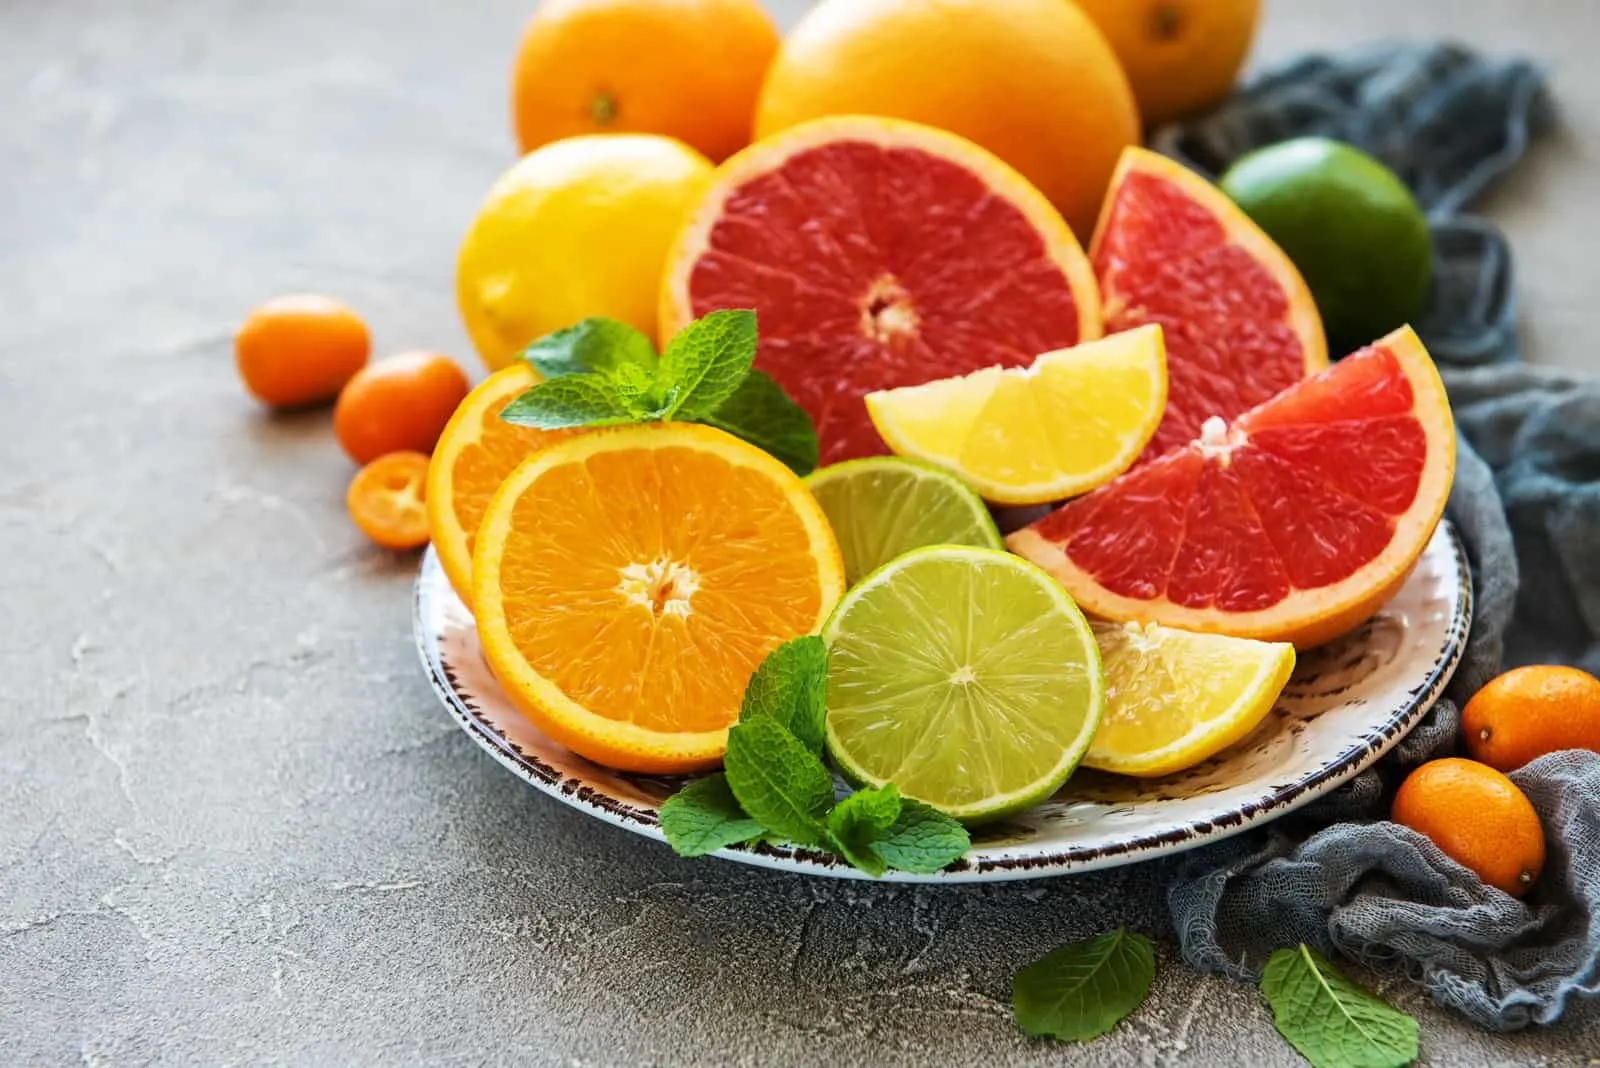 Plate with citrus fresh fruits